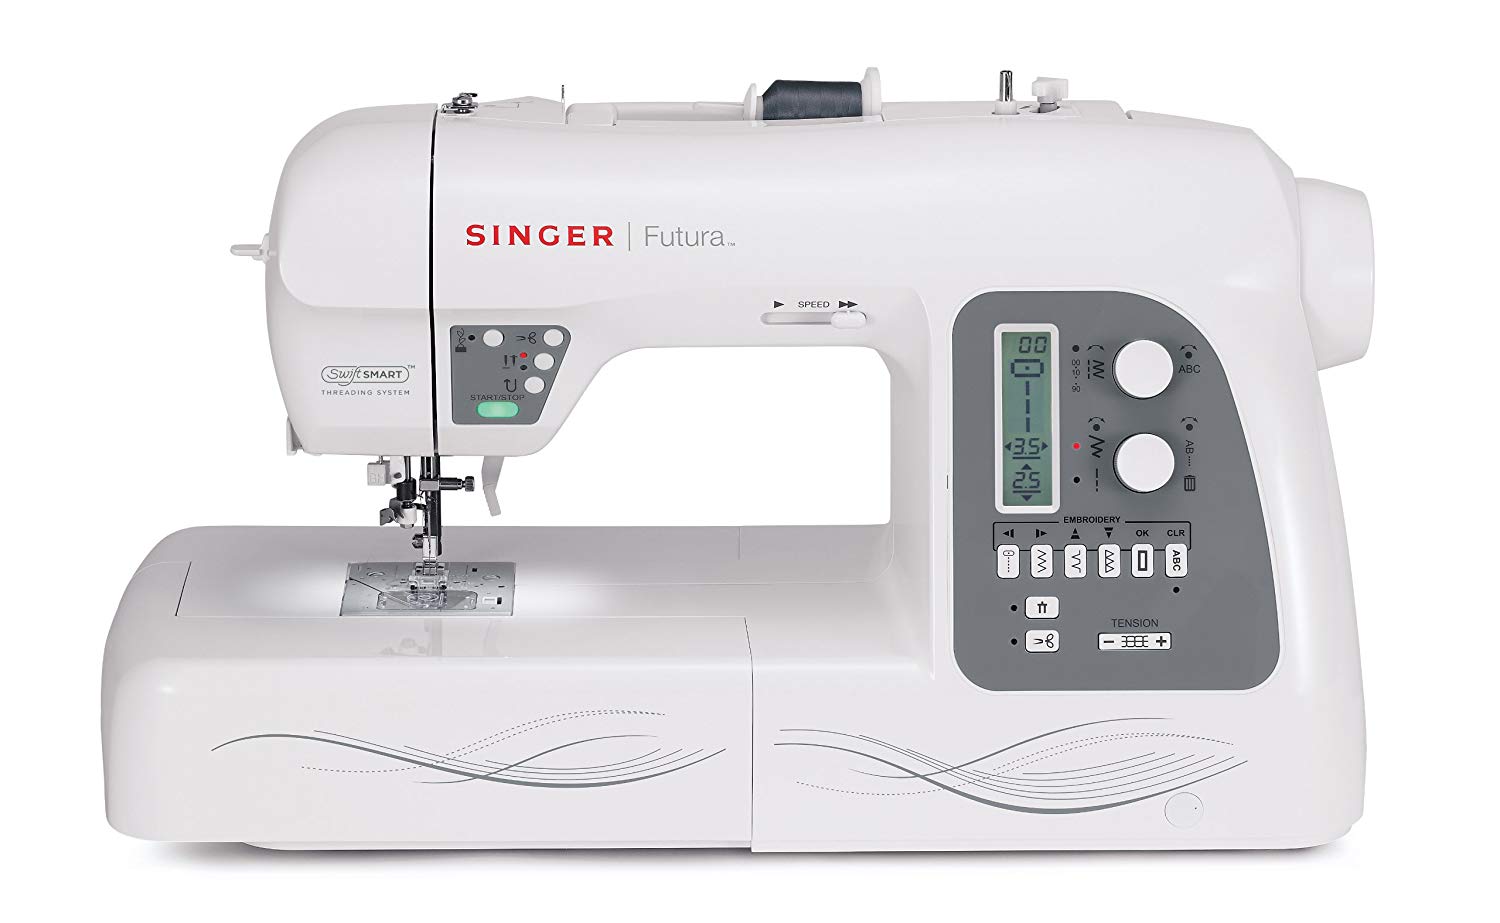 SINGER Futura XL-580 Embroidery and Sewing Machine